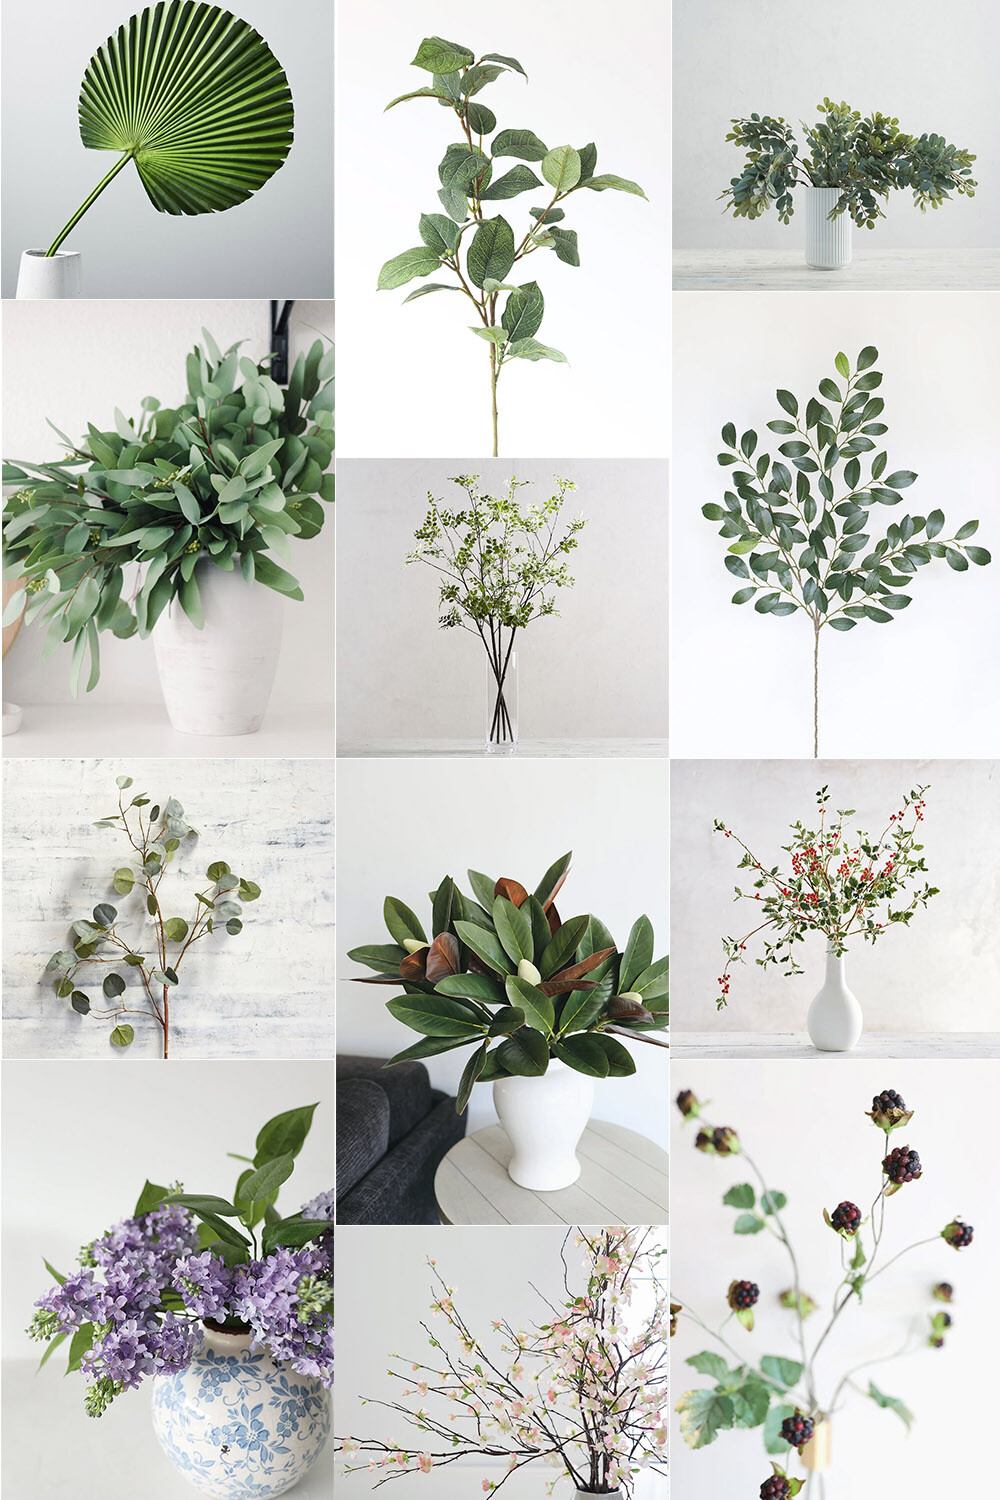 Can't keep your plants alive or find beautiful seasonal flowers? Then this post is for you! I found the Best looking faux flowers and plants!